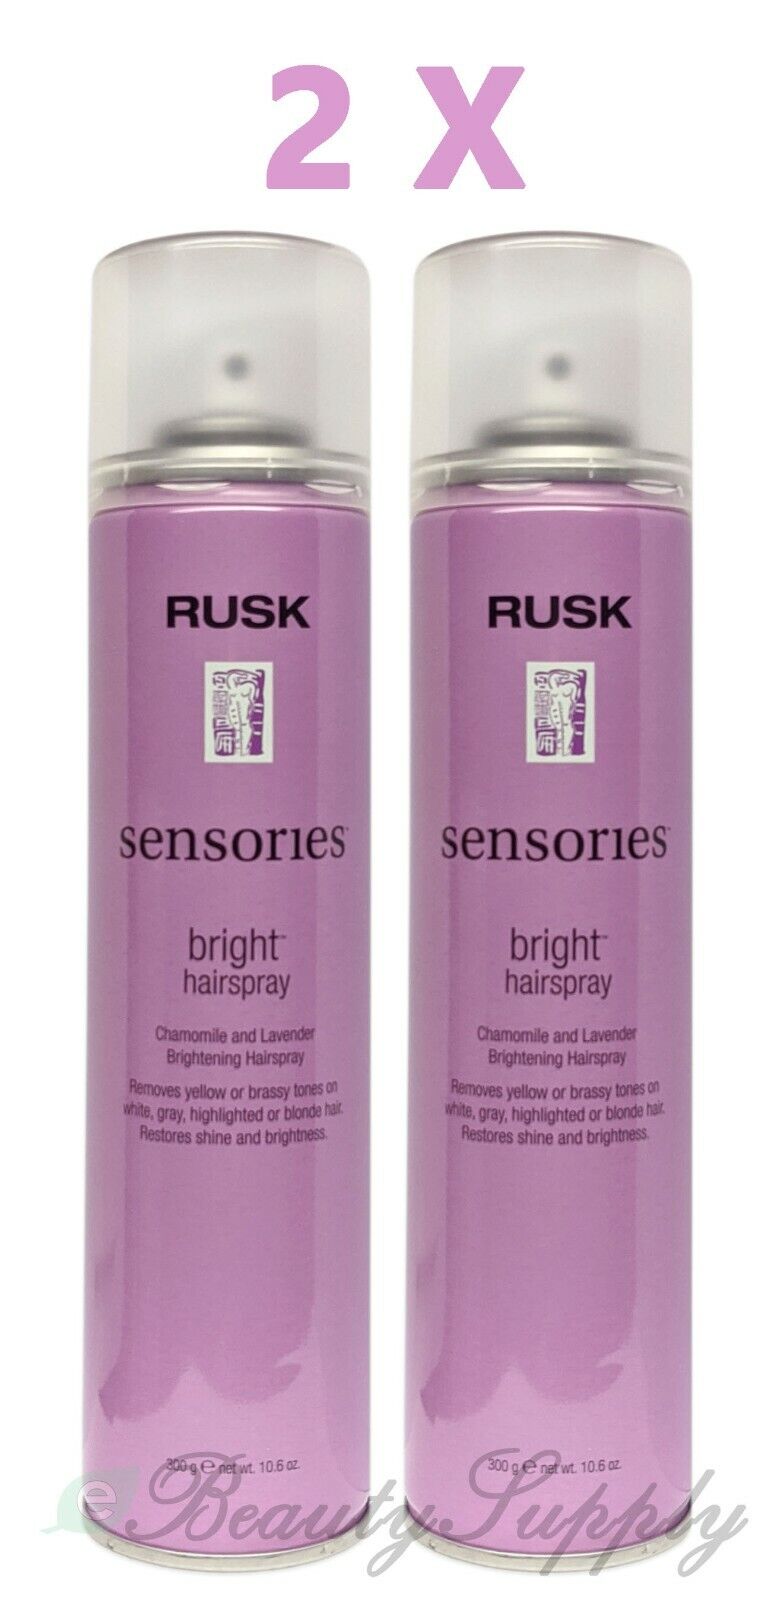 Rusk Sensories Bright Chamomile and Lavender Brightening Hairspray (Lot of 2) Rusk